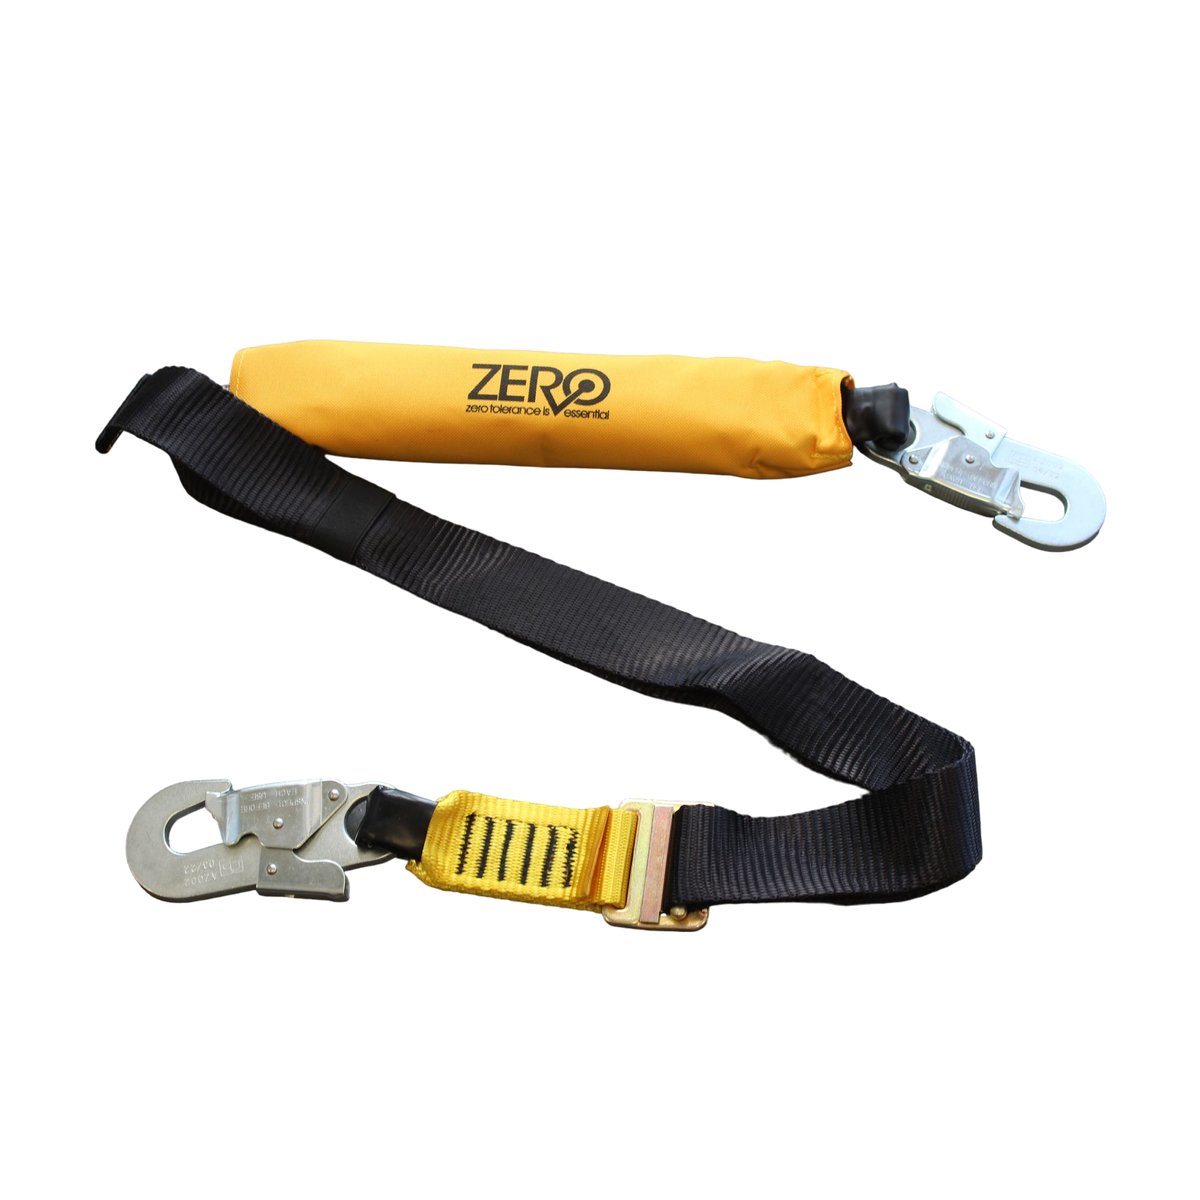 Buy Lanyard with Karabiners in Forklift Cages and Safety Gear from Astrolift NZ